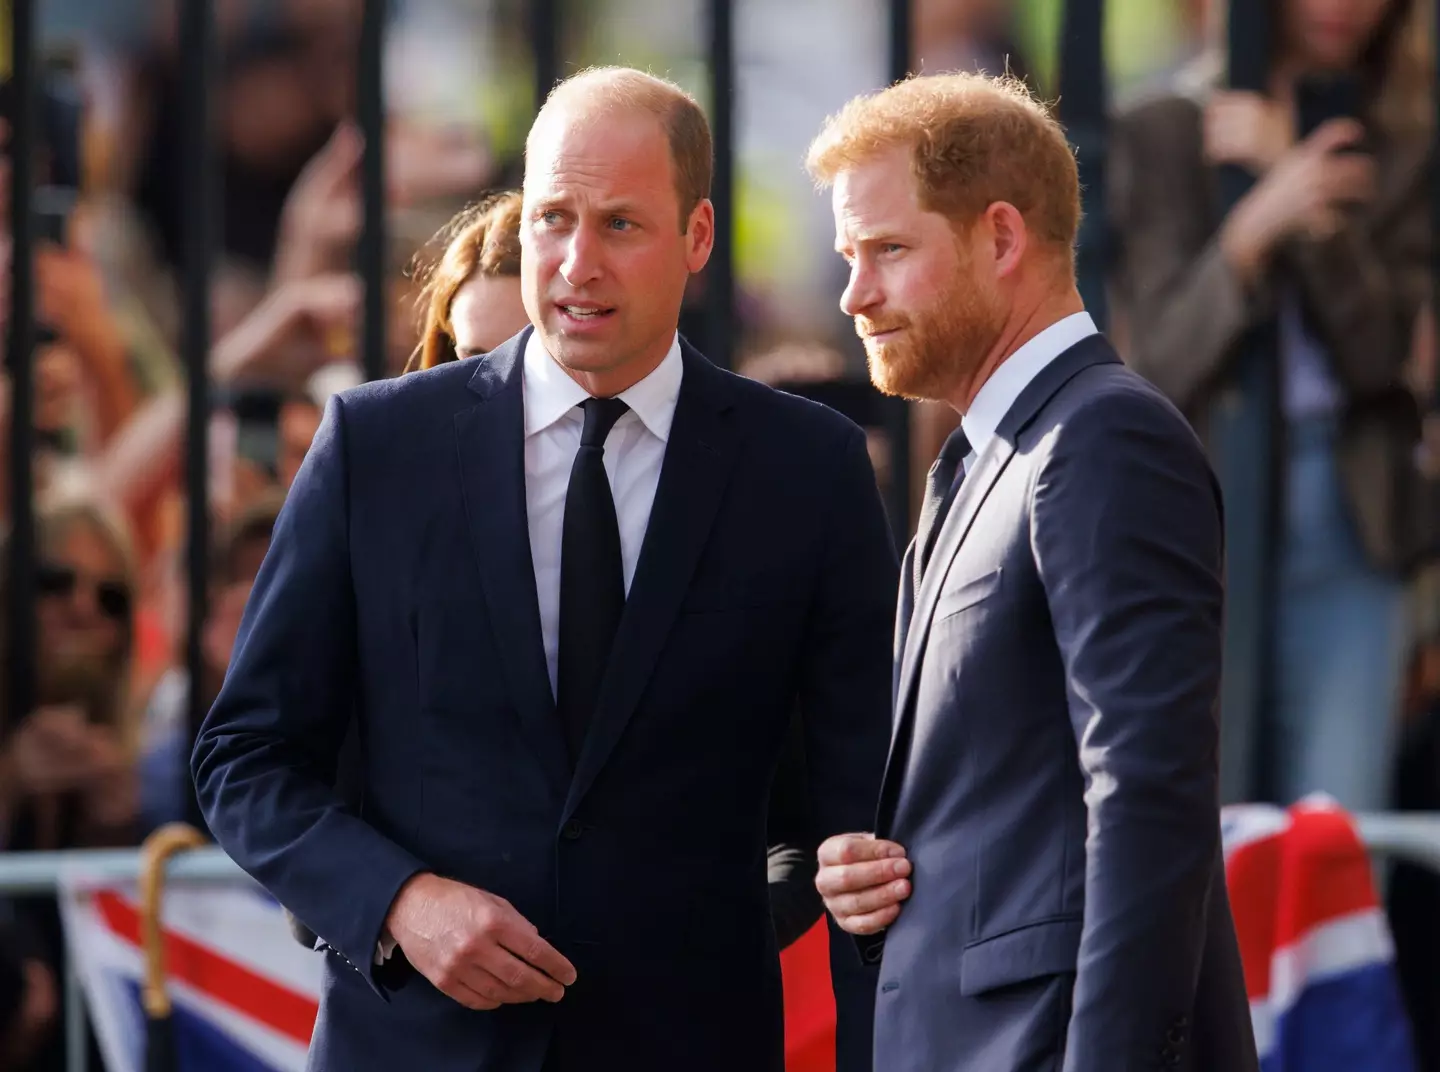 Harry and William were reunited in Windsor following the death of the Queen.